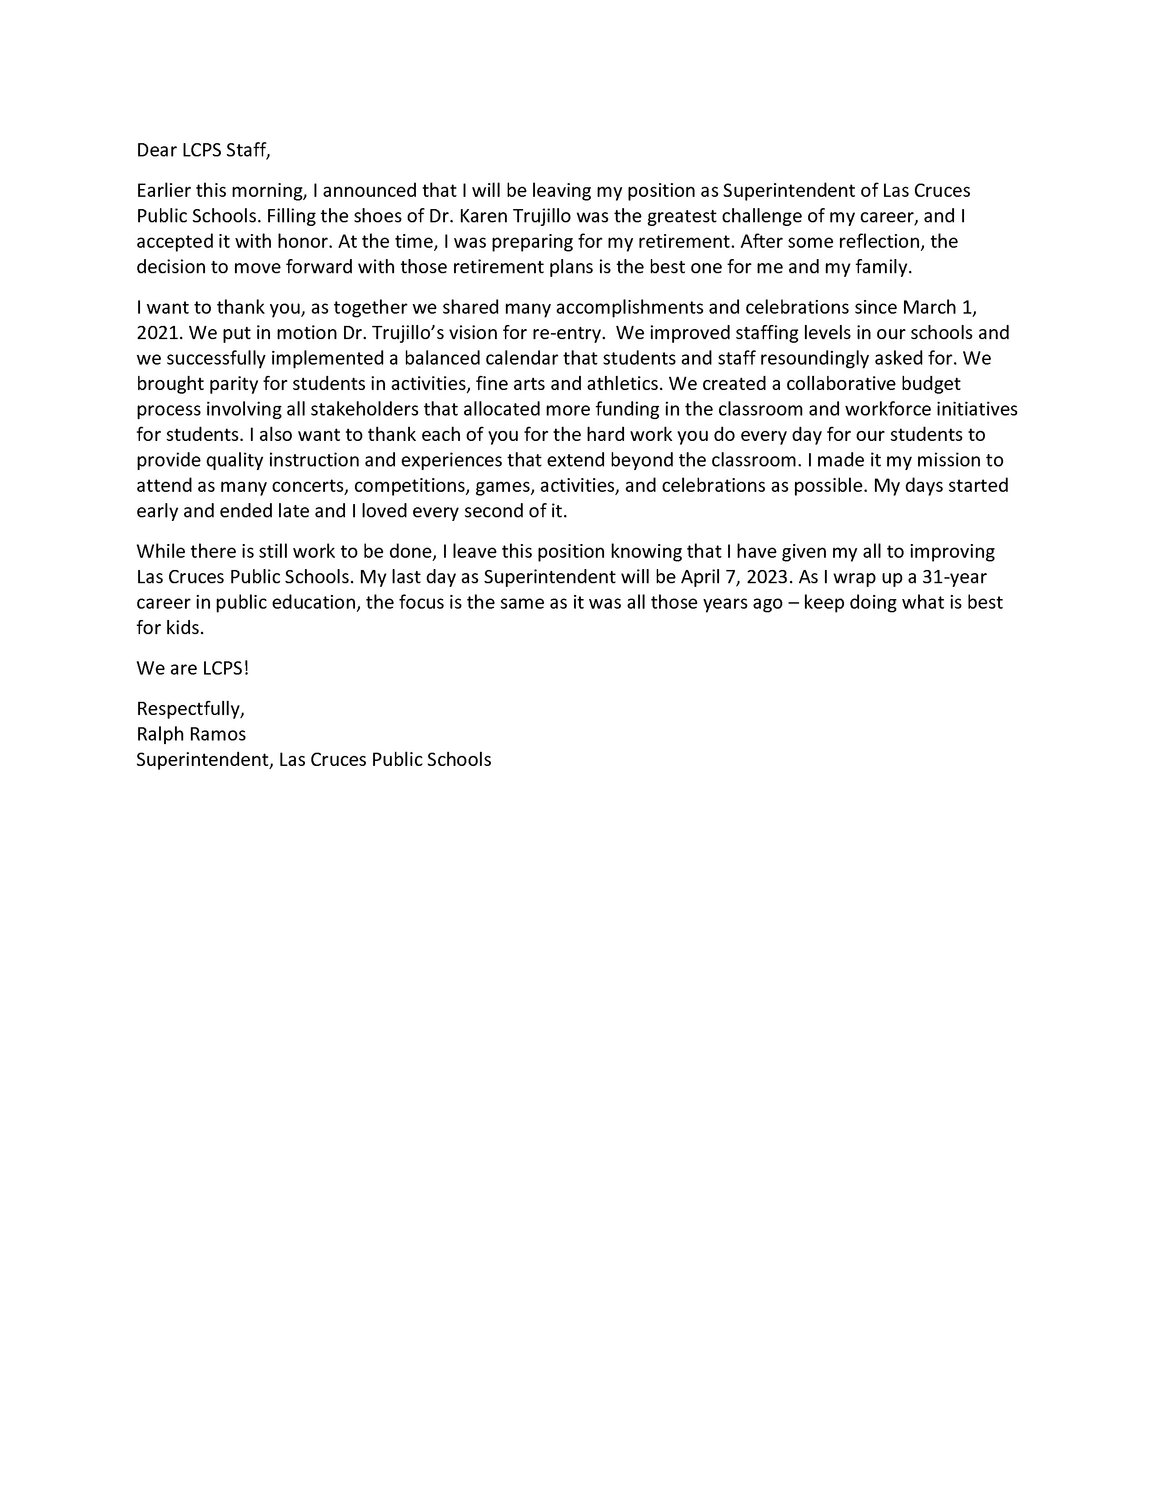 Ralph Ramos letter of resignation to his staff